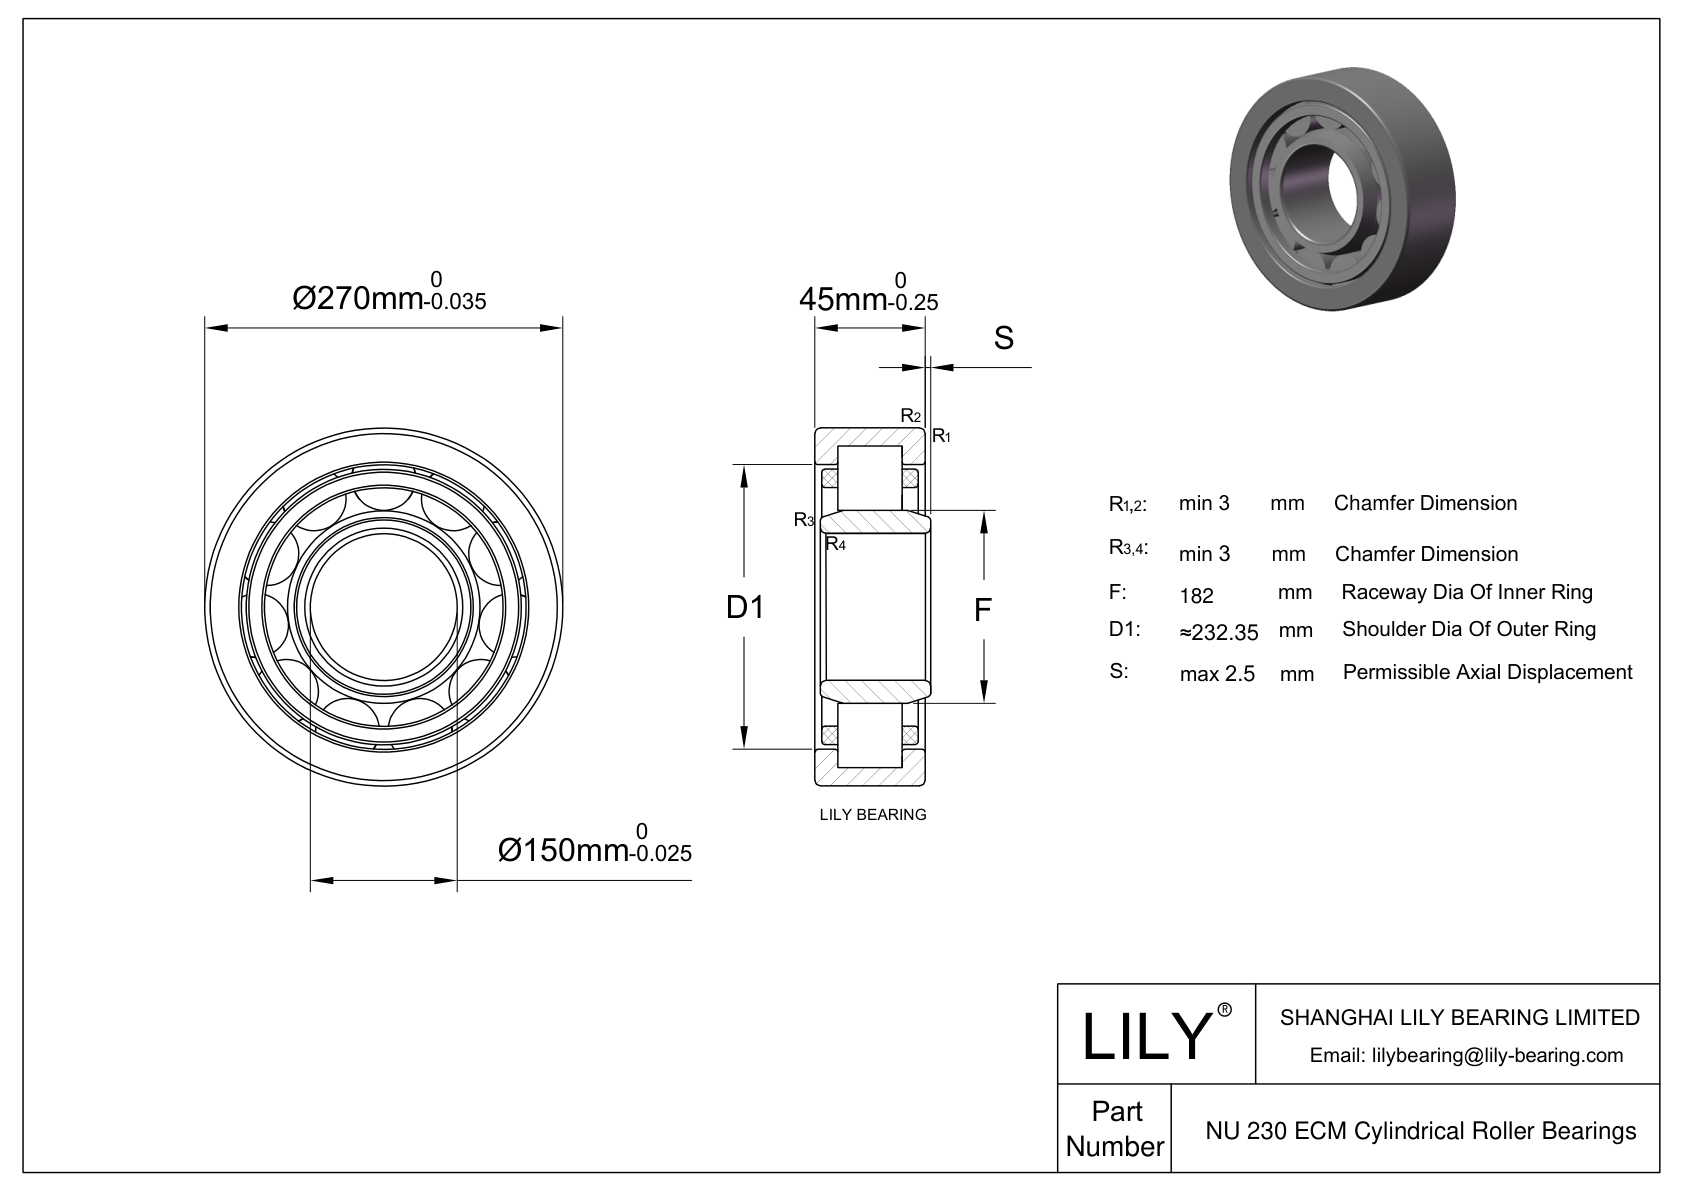 NU 230 ECM/C3VL2071 Ceramic Coated Cylindrical Roller Bearings cad drawing